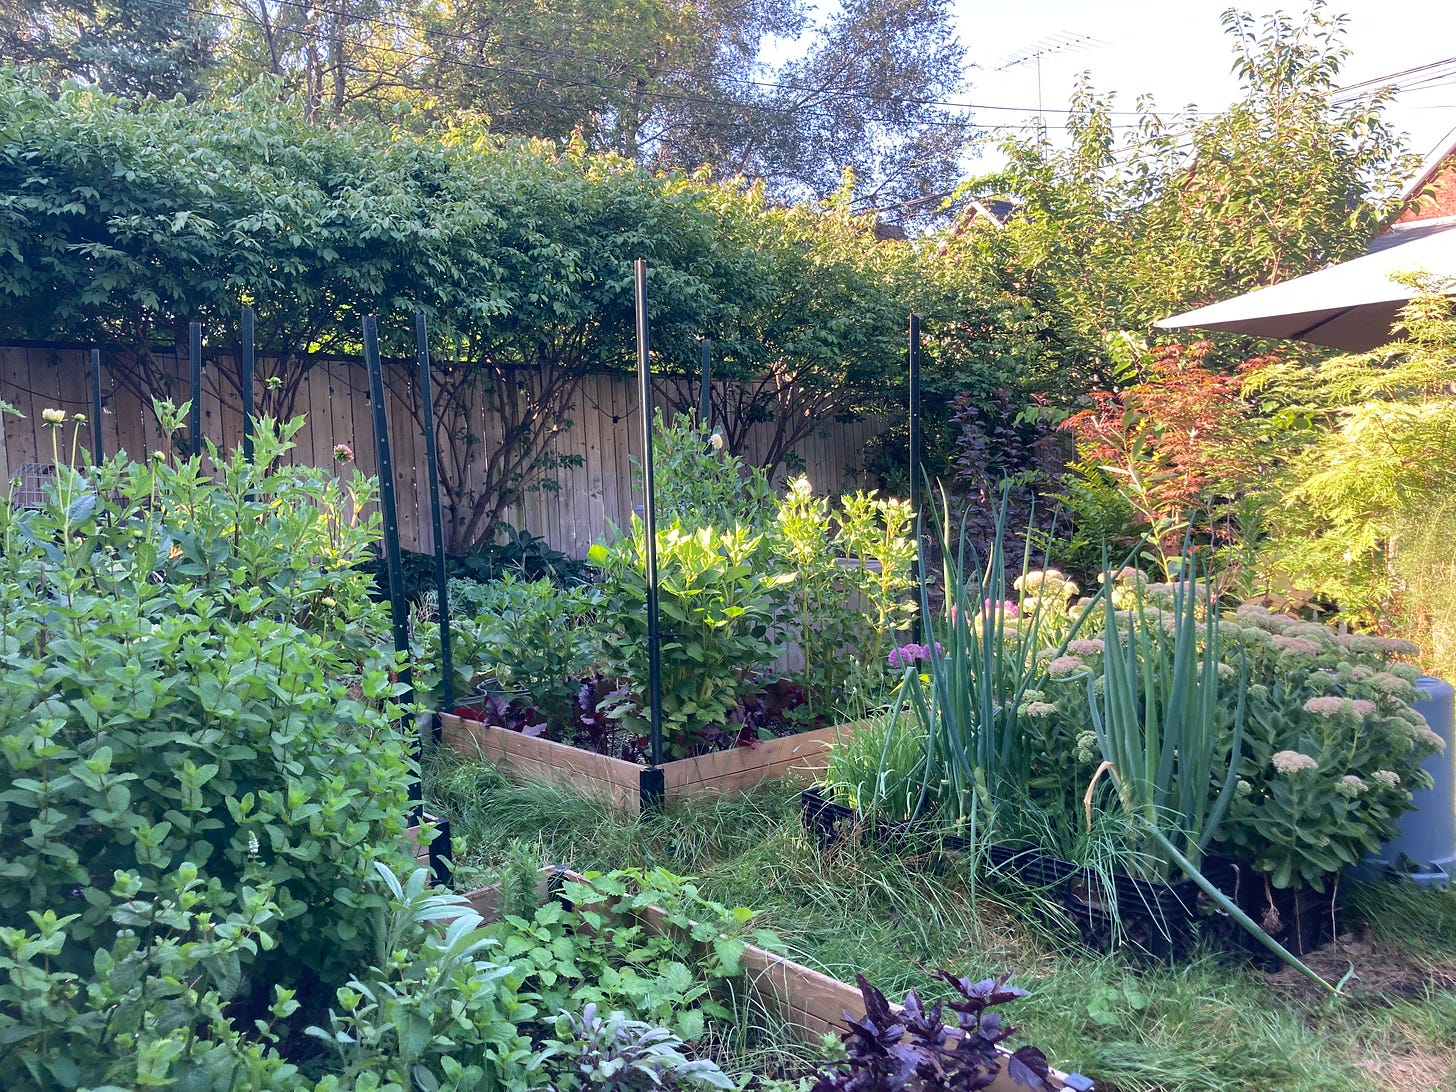 A backyard with raised wooden beds for growing contaiing herbs, dahlias, sedum, alliums and onions. In the back a Japanese maple, elderberry, and ninebark are visible.